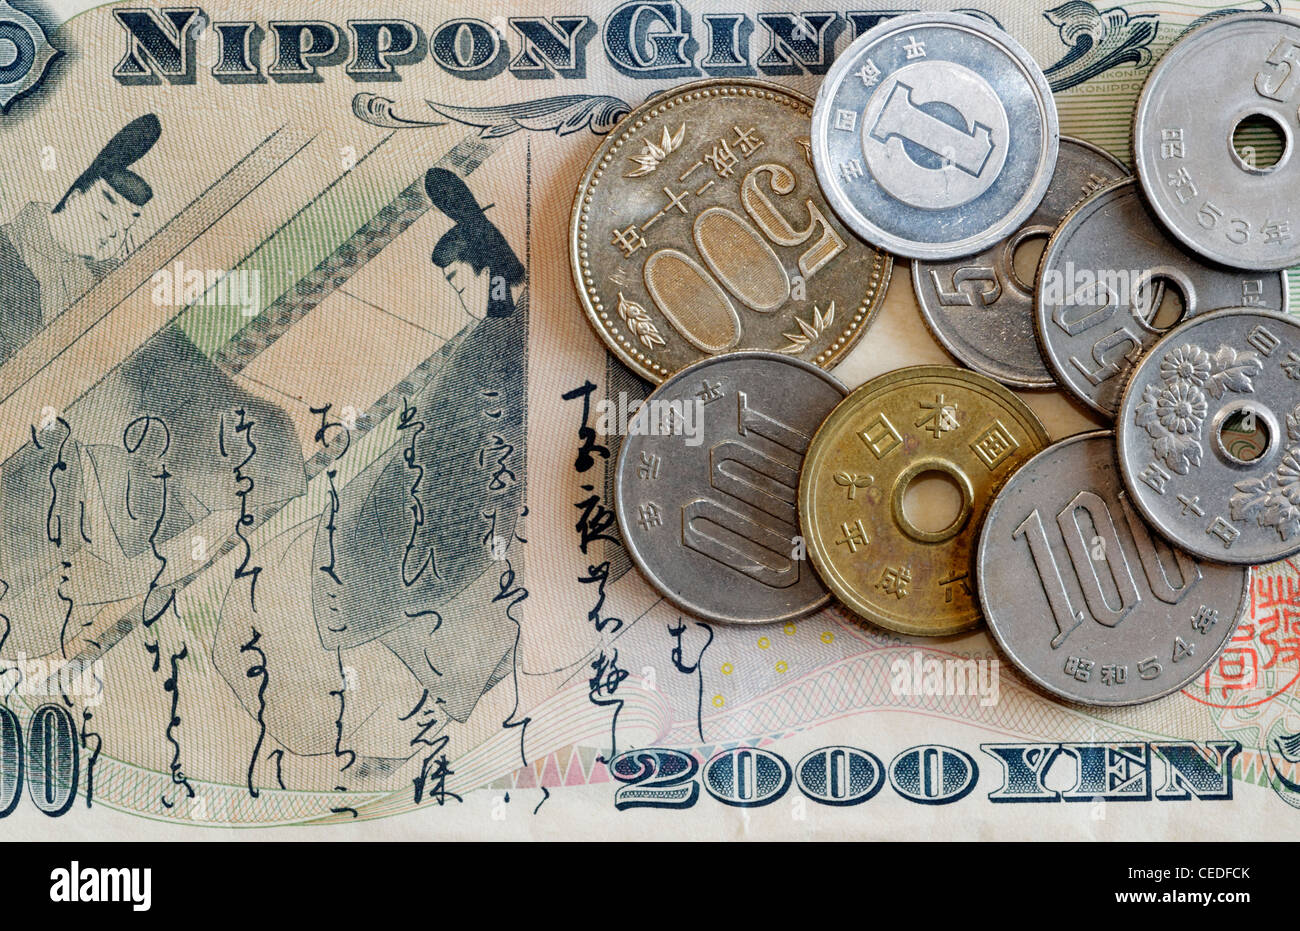 Japanese yen banknotes and coins Stock Photo